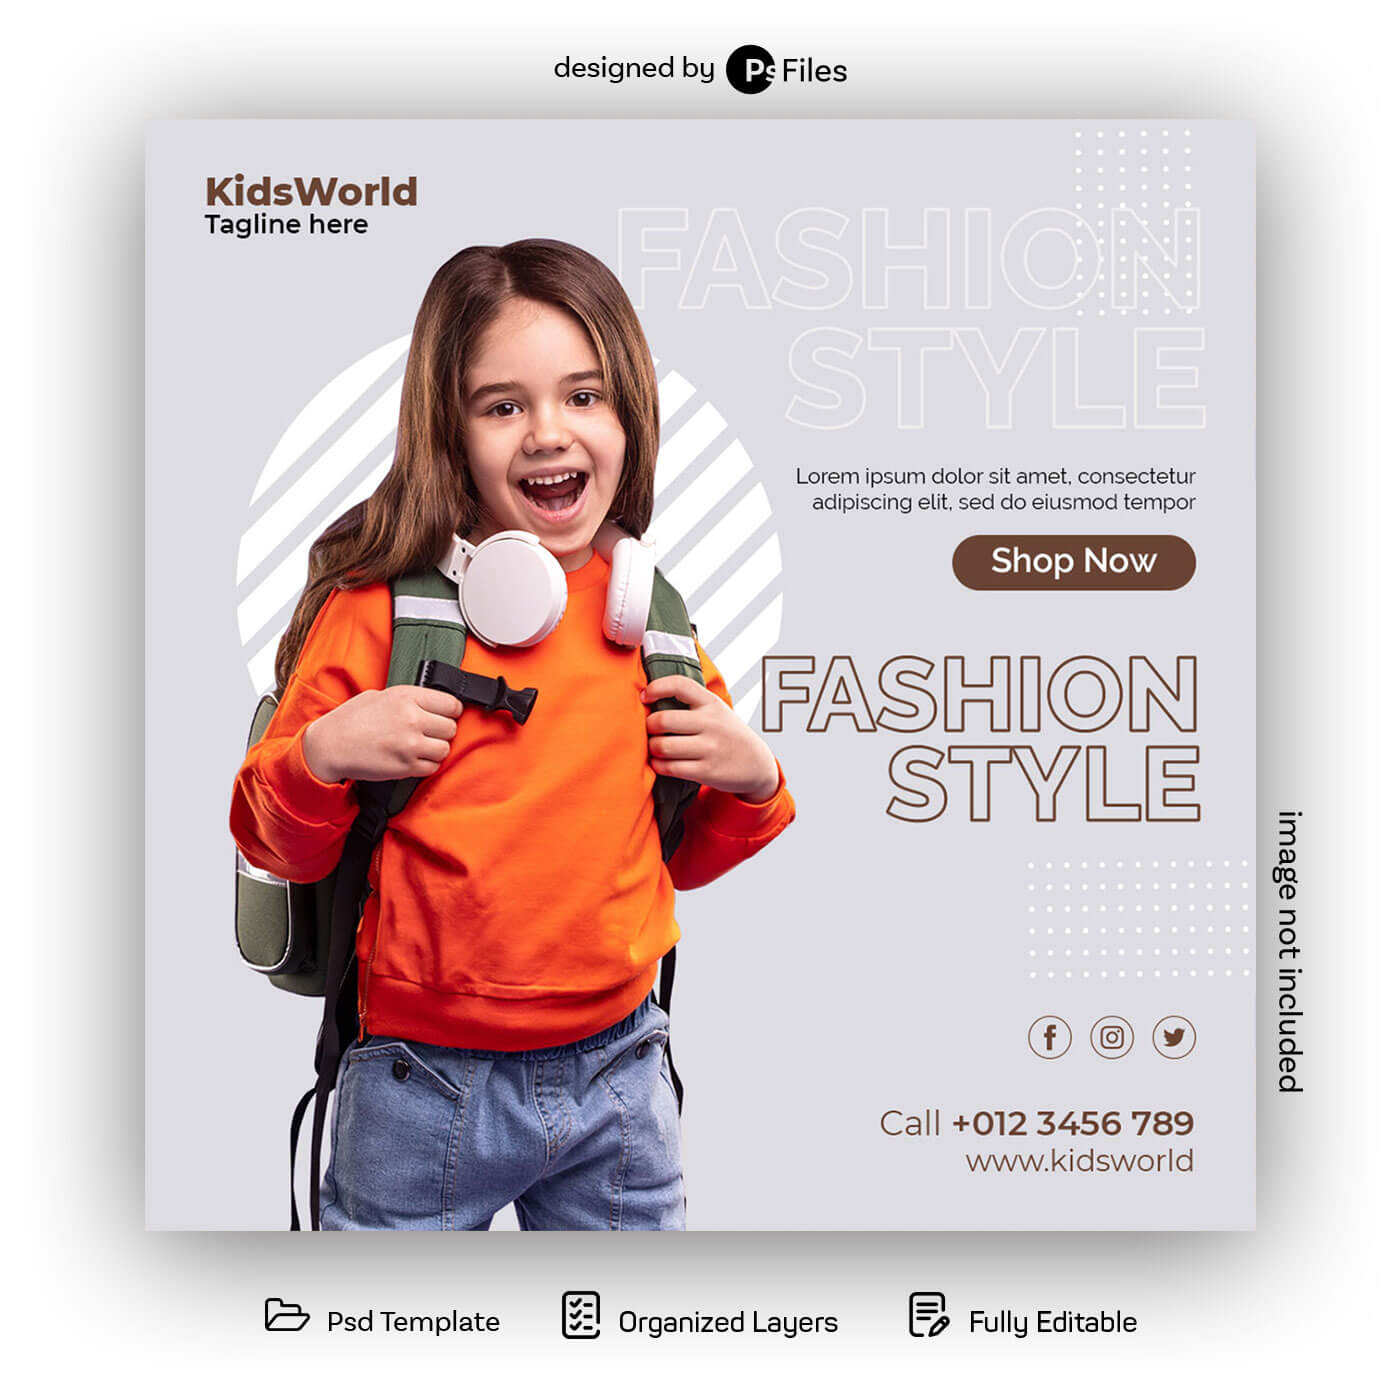 Free Kid's Clothing Store Instagram Post Design PSD Template Download